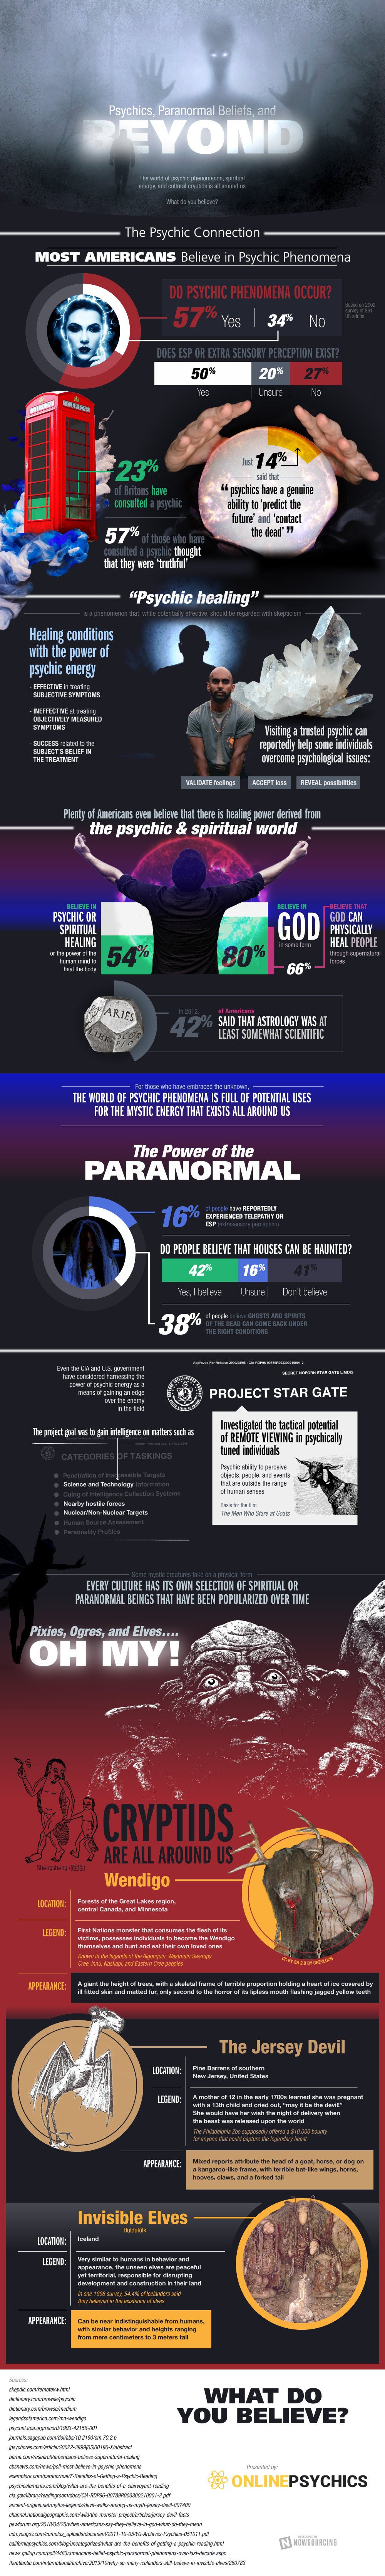 The Power of the Beyond: Human Beliefs and Fears - Infographic